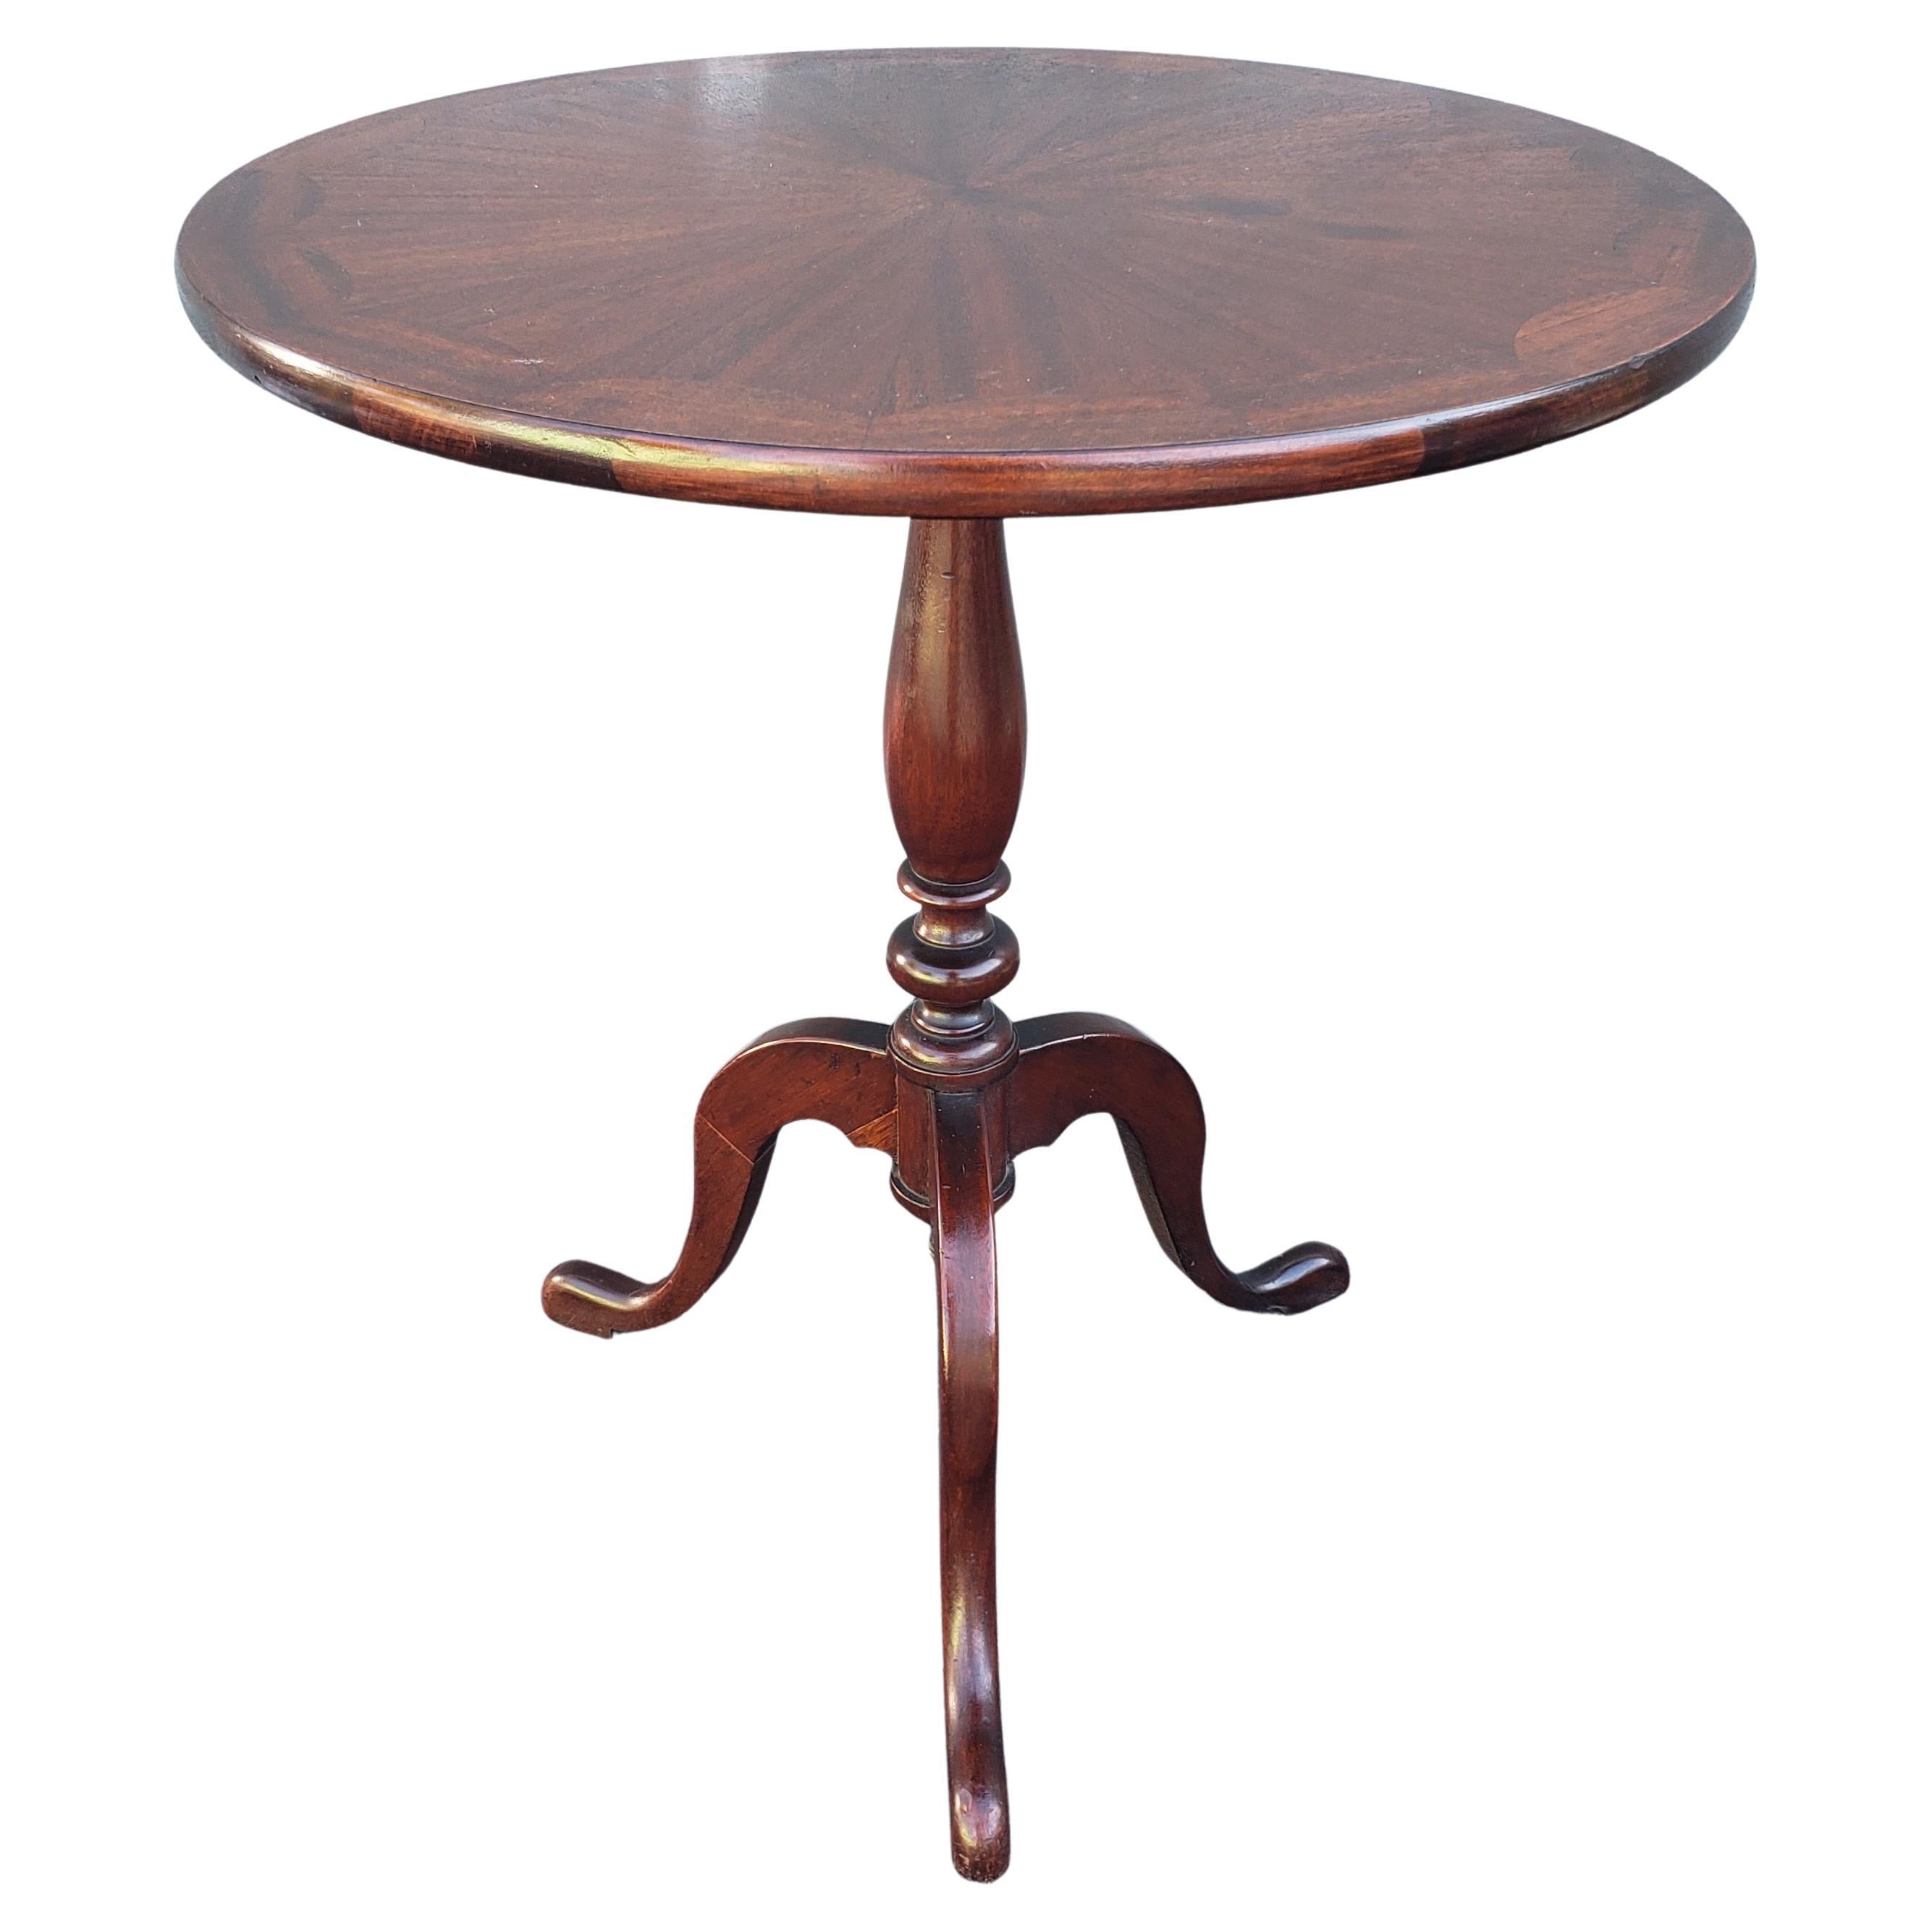 19th Century English Mahogany One Board Parquetry Tilt-Top Tea Table Desert Table, C. 1860s For Sale